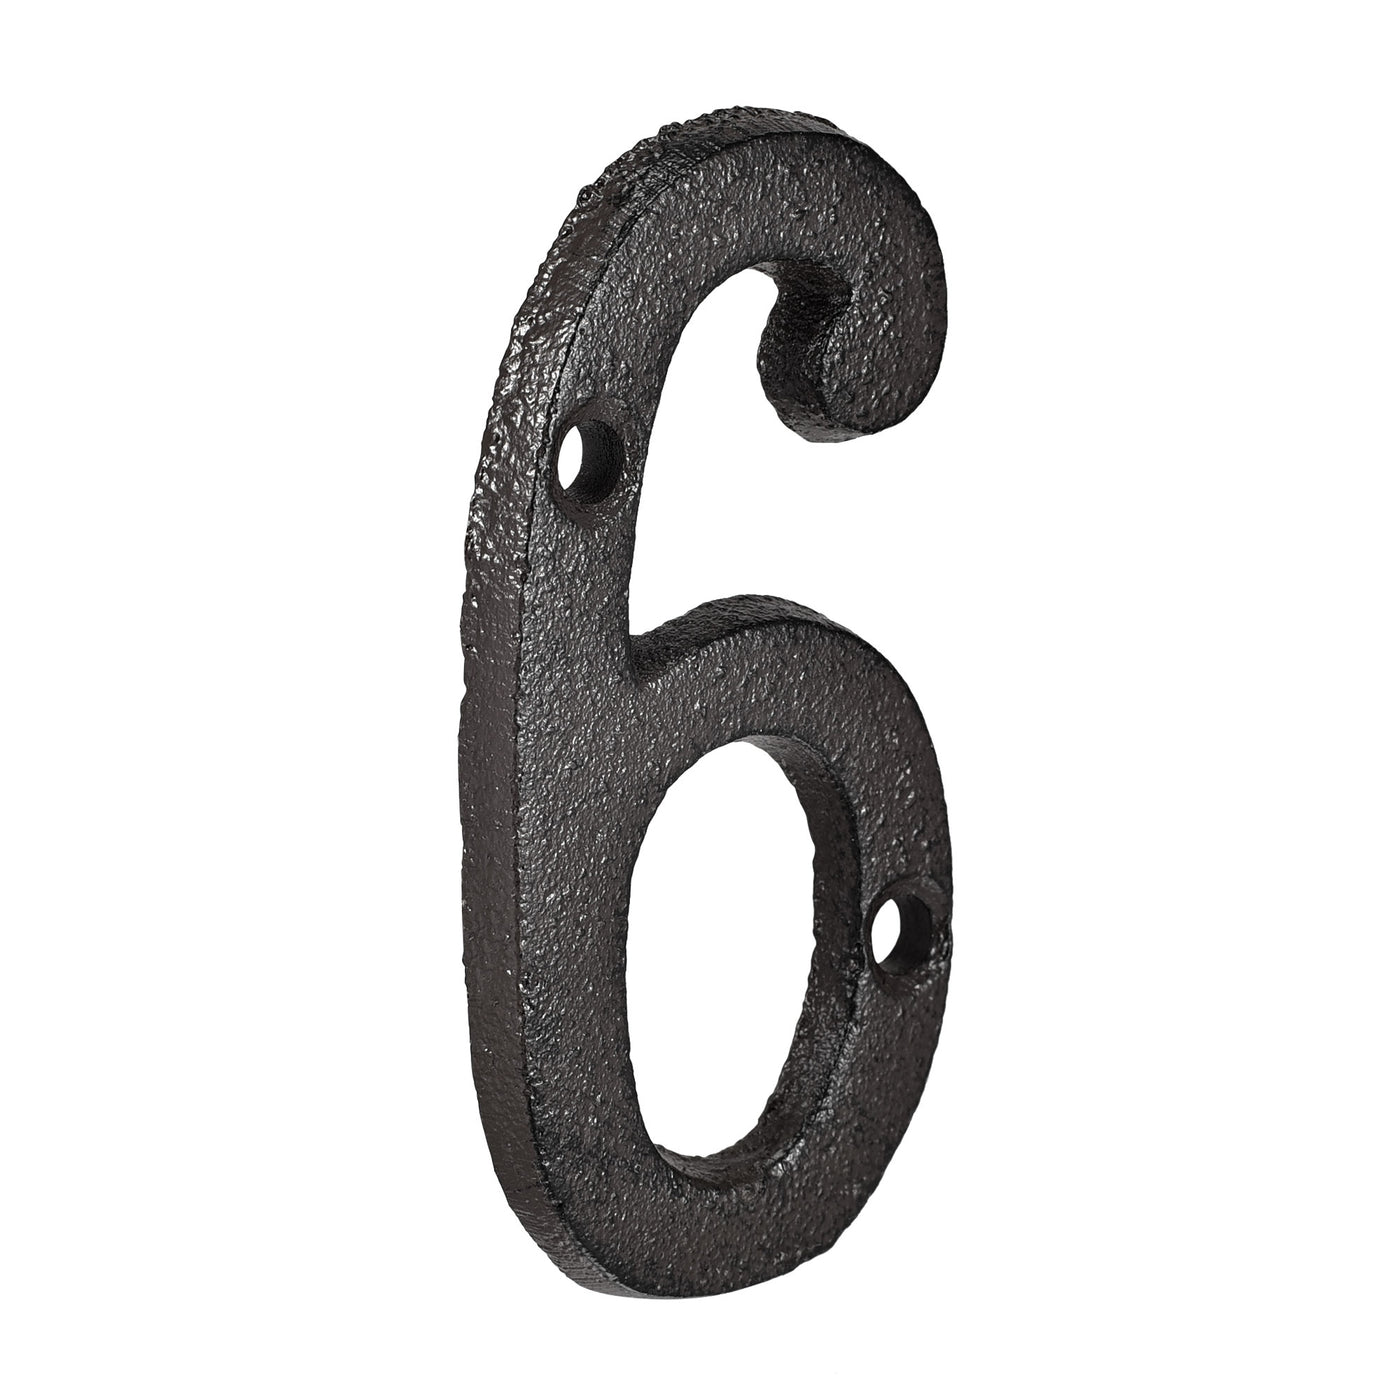 Uxcell Uxcell House Number, 3 Inch Cast Iron Number 1 for Home Hotel Mailbox Address Sign